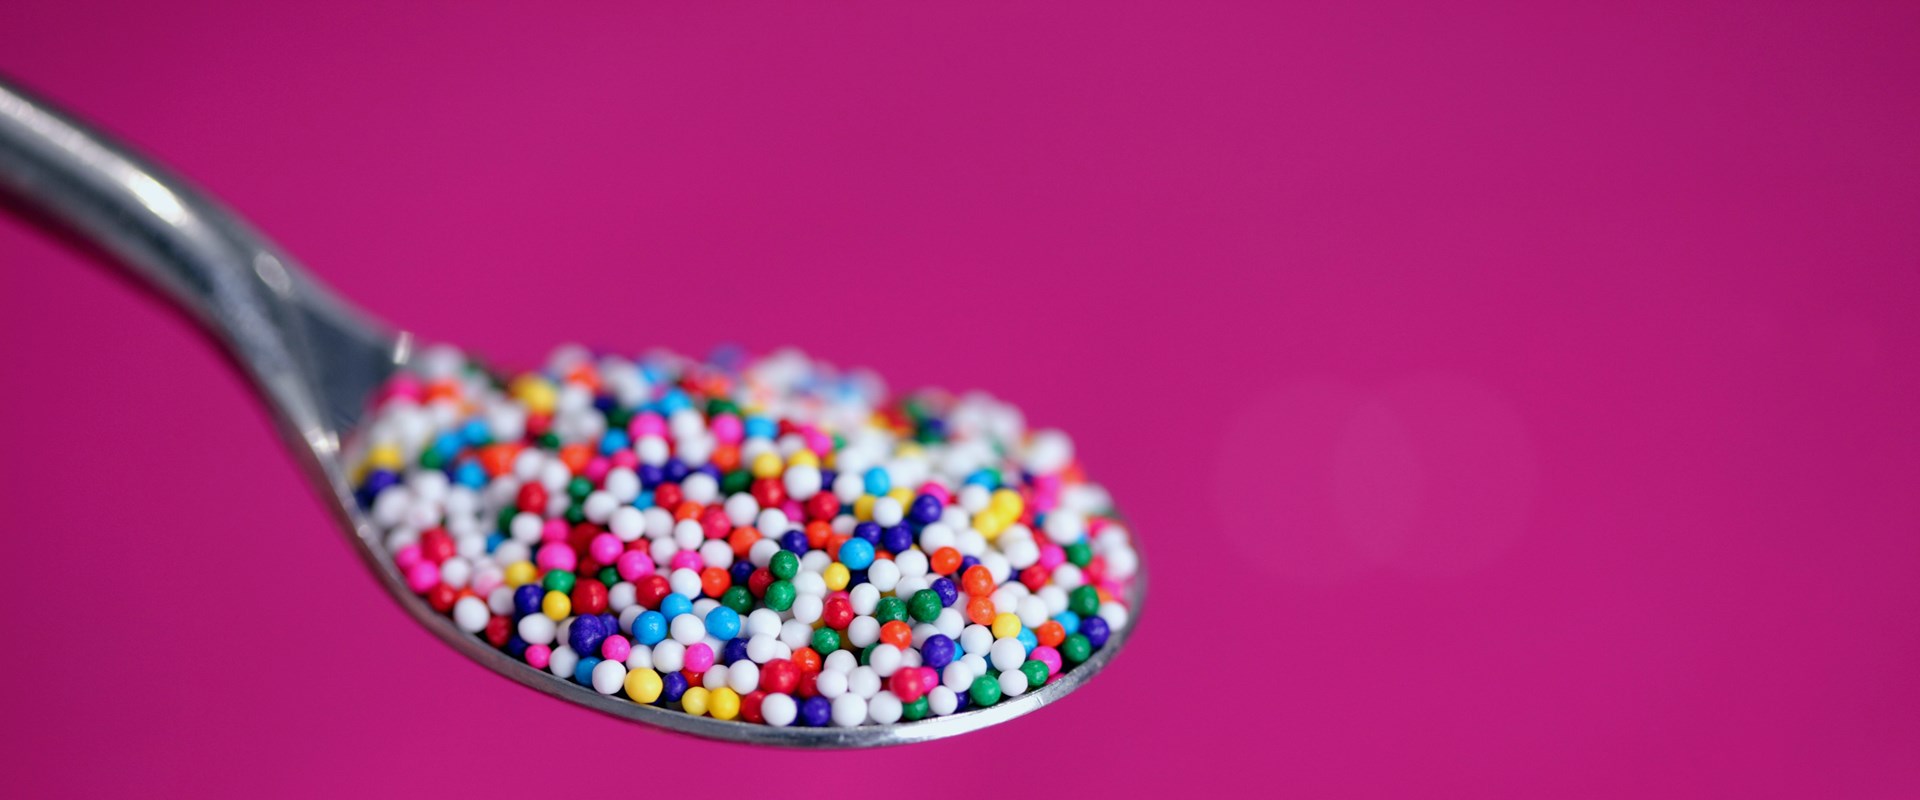 A spoonful of coloured sugar. Photo by Alexander Grey on Unsplash